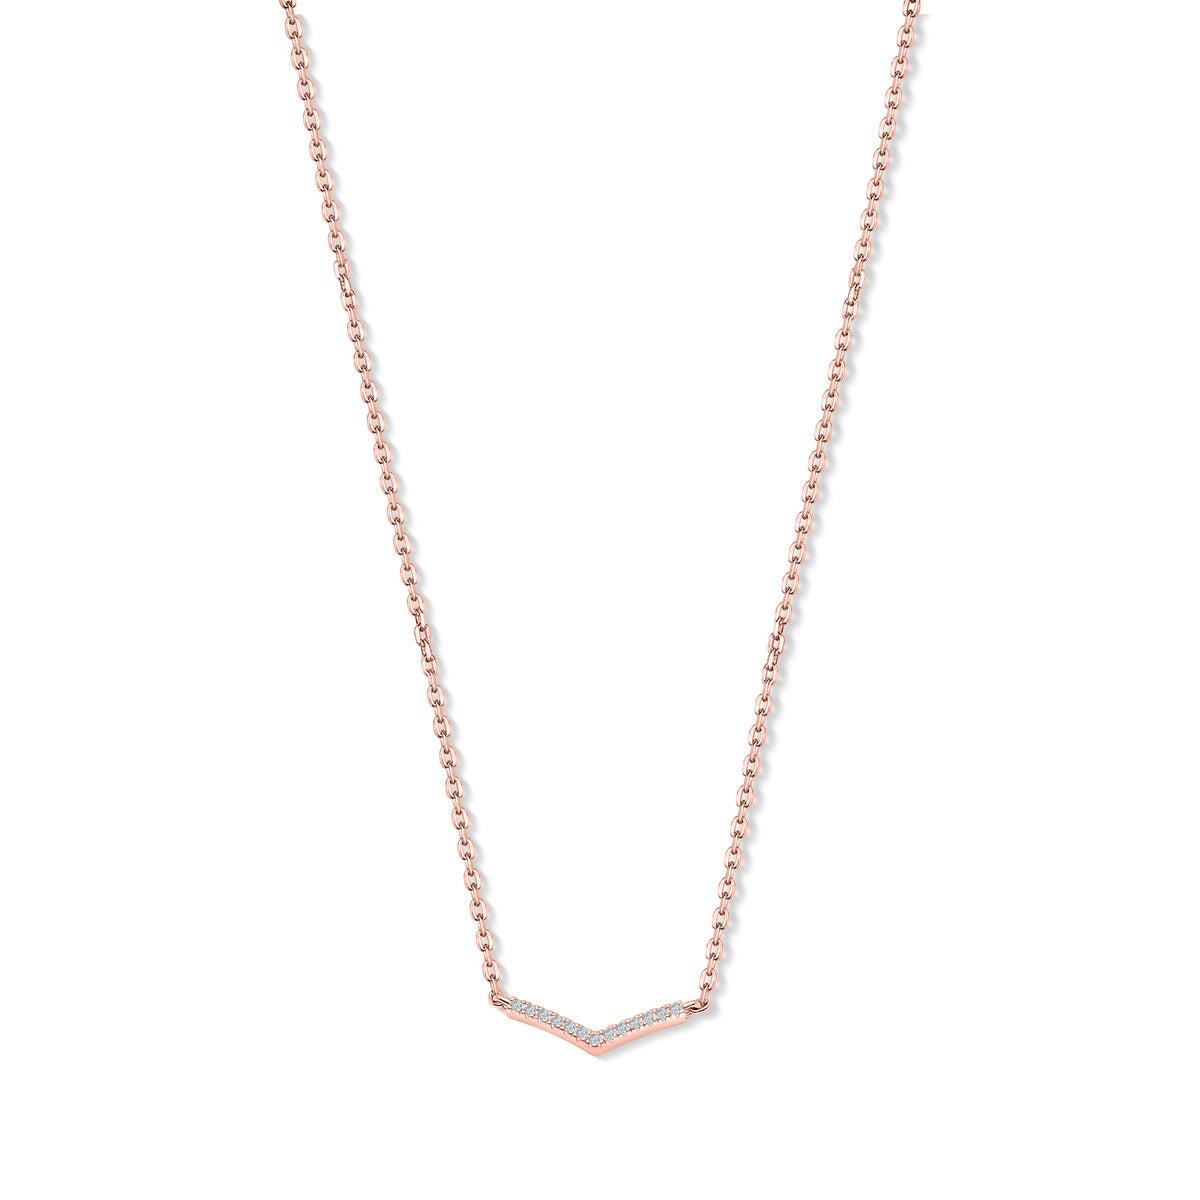 Rose gold v shaped chain necklace